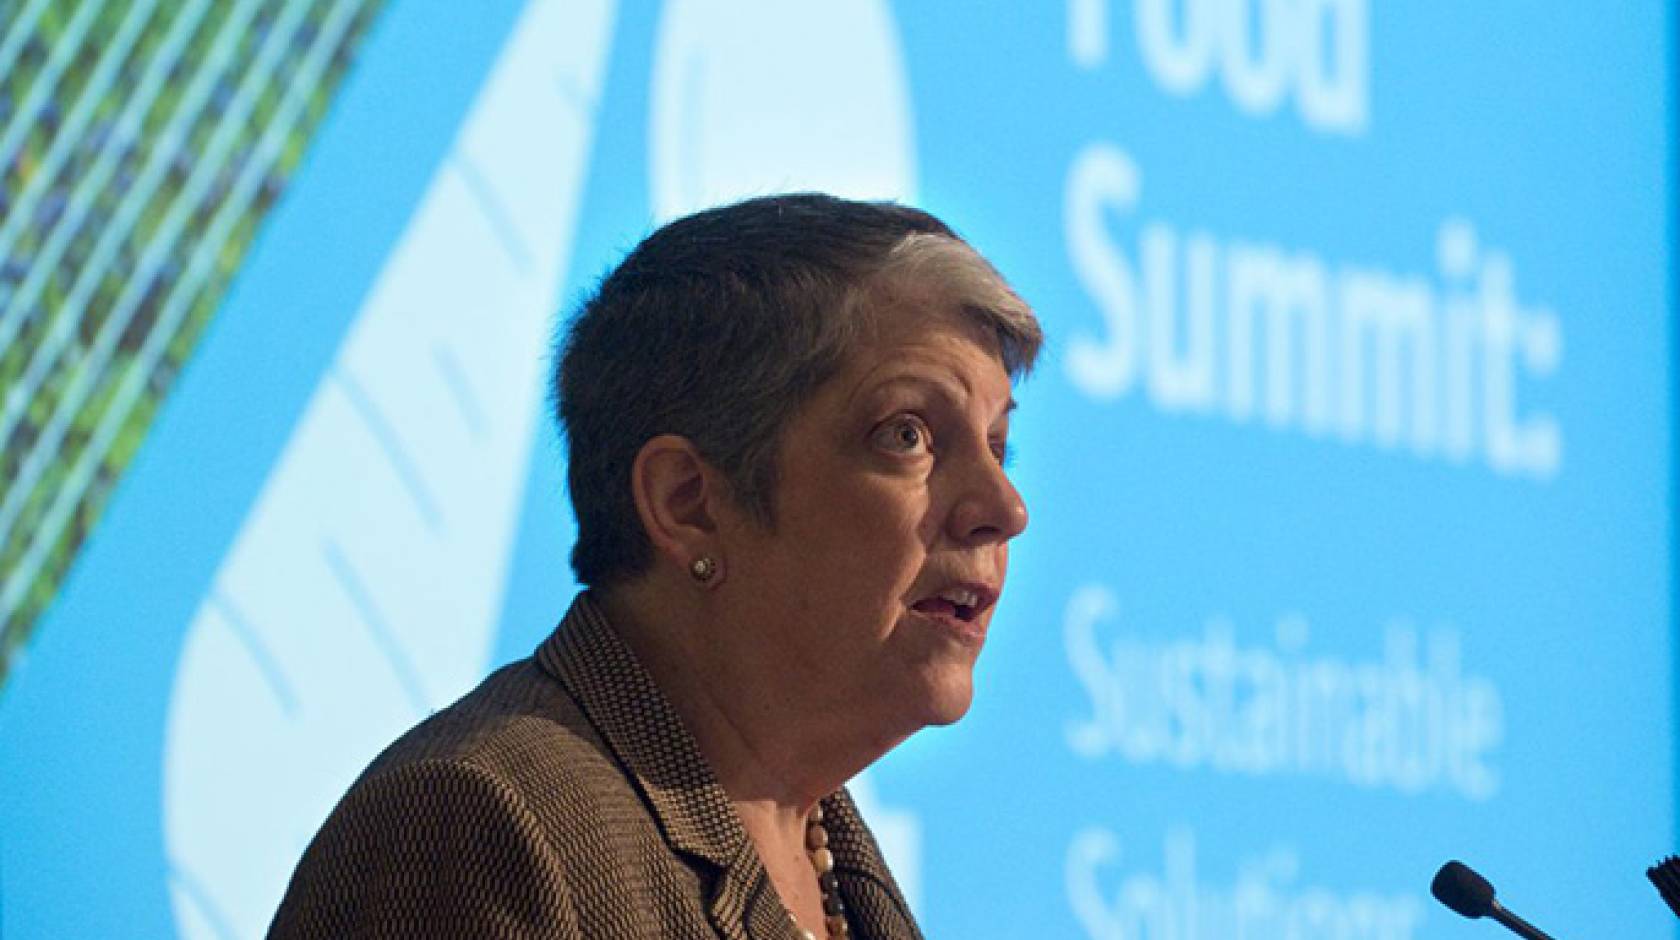 UC President Janet Napolitano delivers the Global Food Summit's keynote address at the UC Irvine Beckman Center.